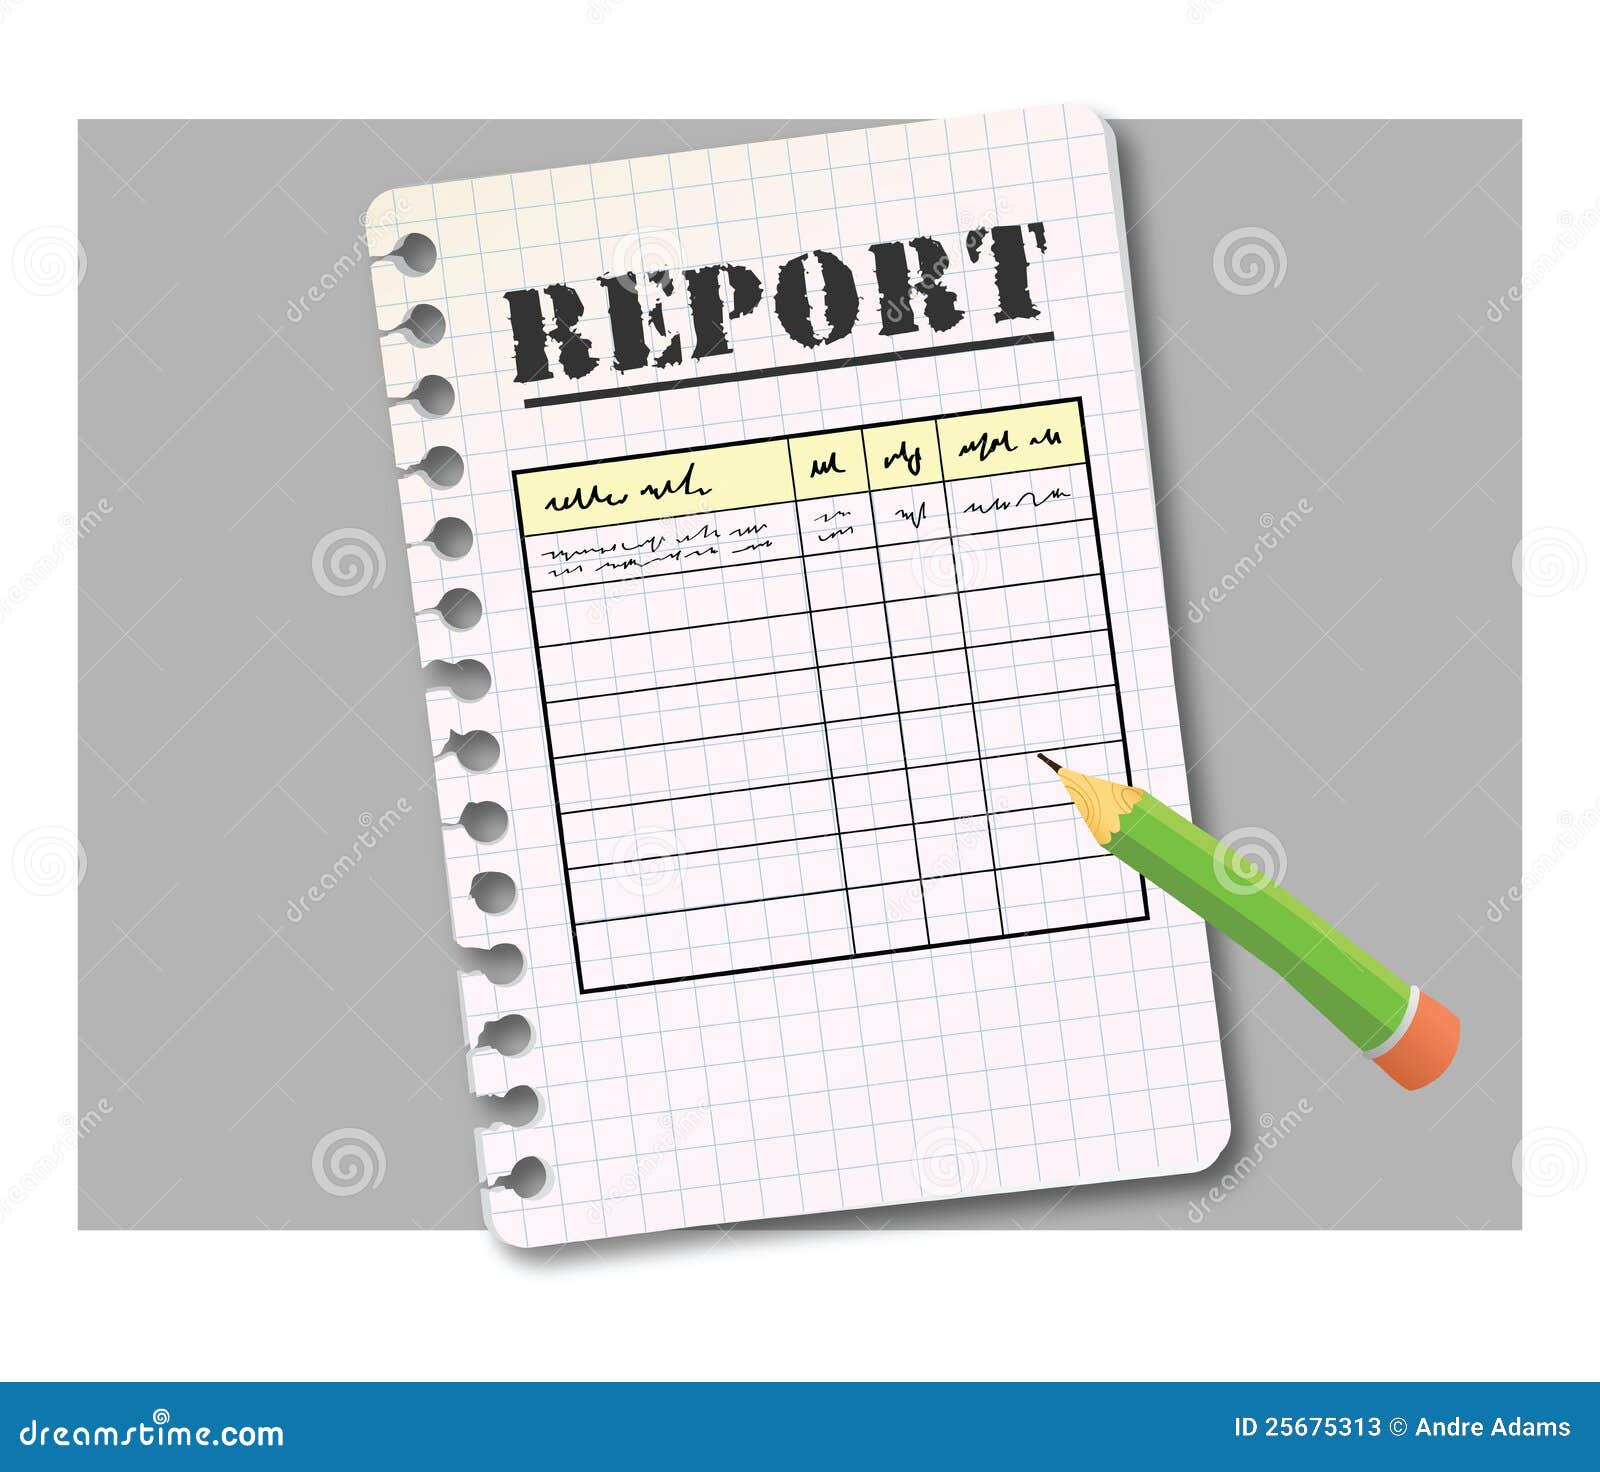 clip art business reports - photo #50